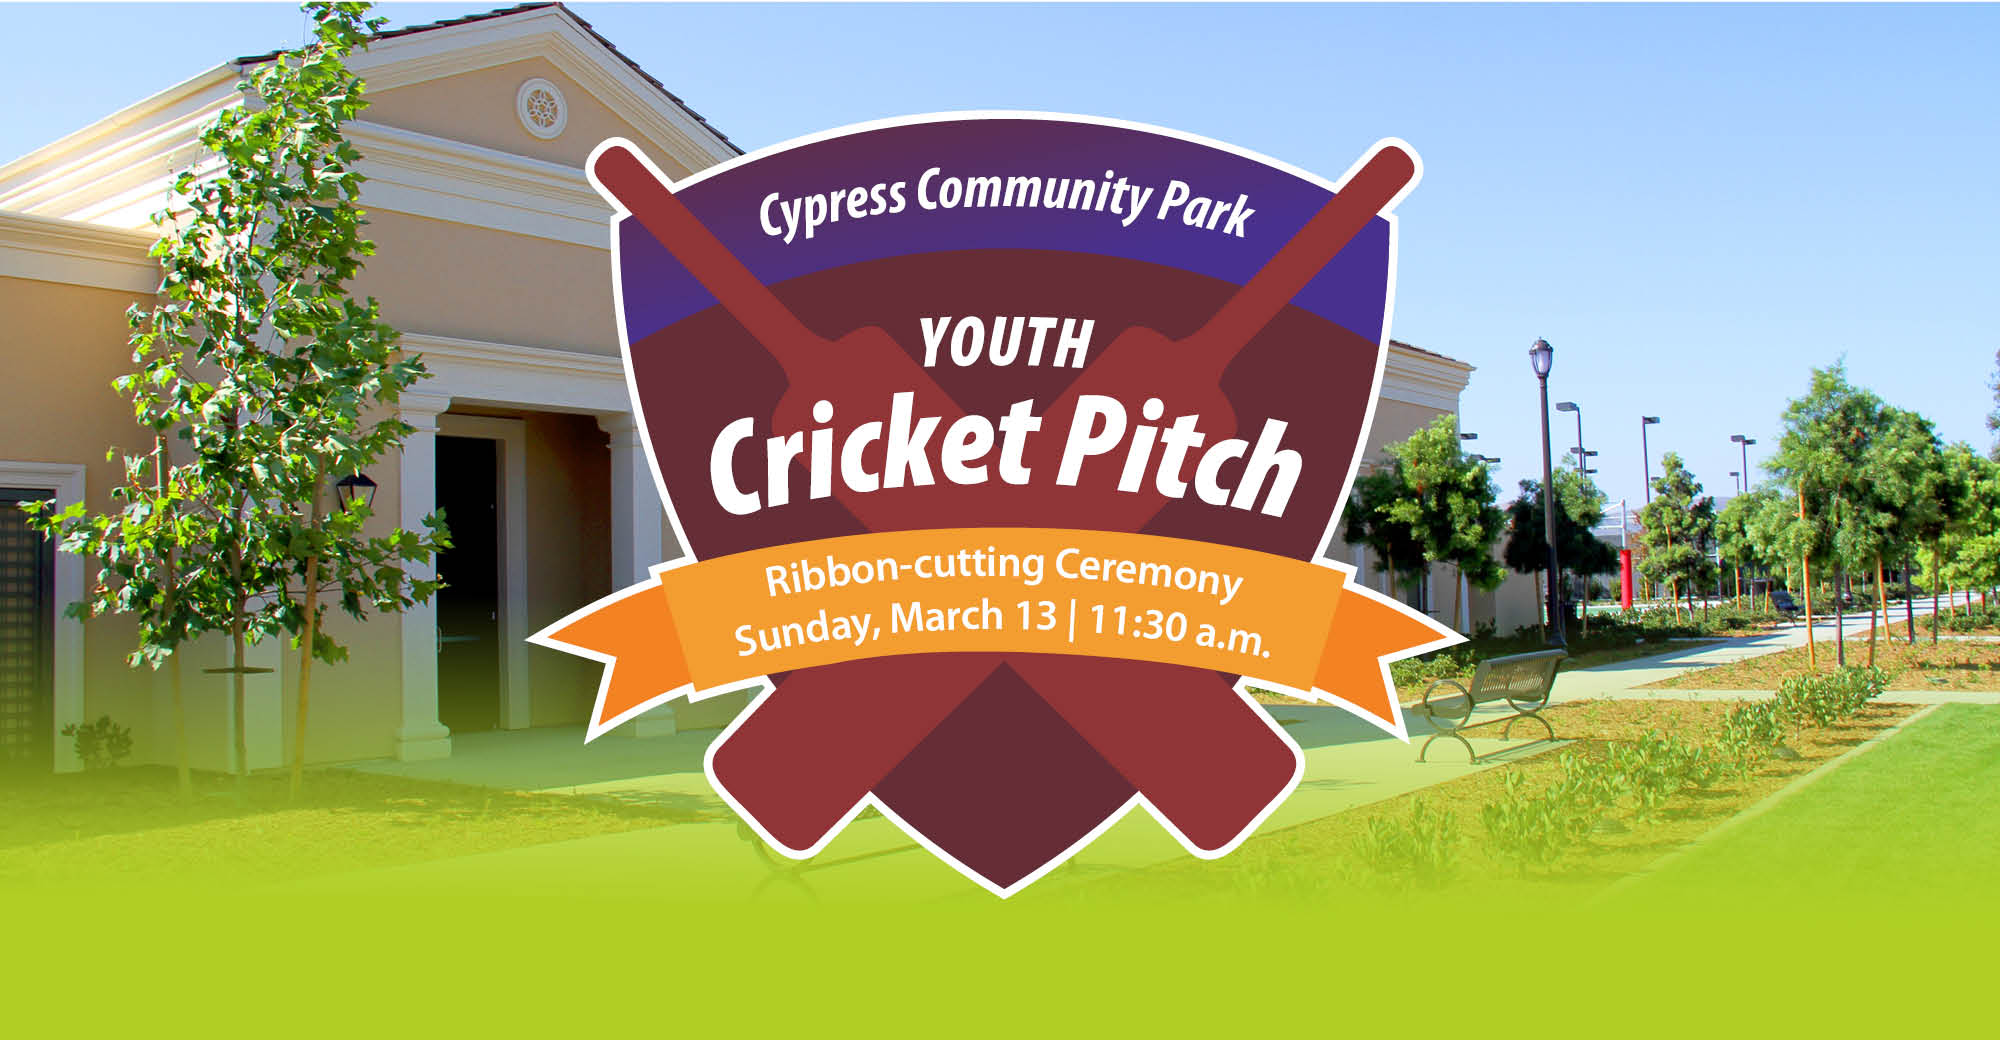 Youth Cricket Pitch Opening at Cypress Community Park in Irvine City of Irvine